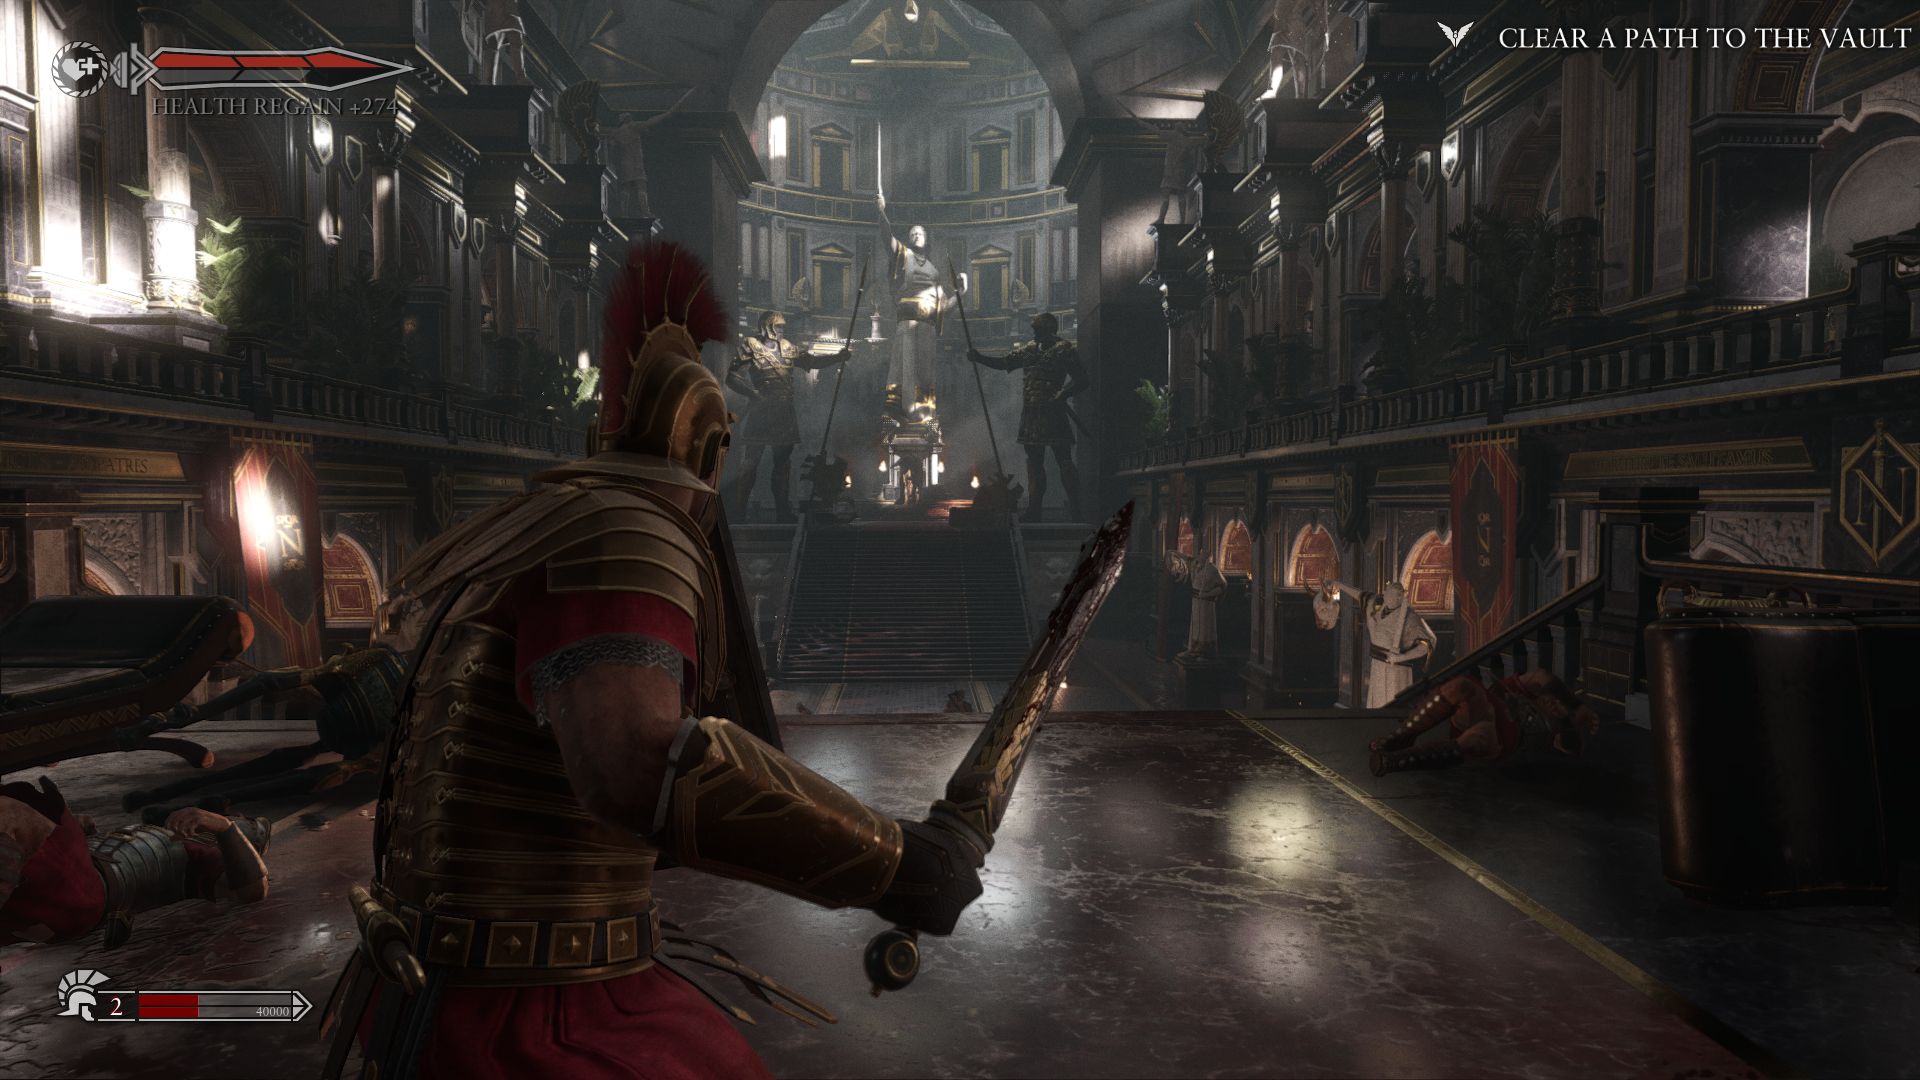 Crytek's Ryse: Son of Rome bores reviewers